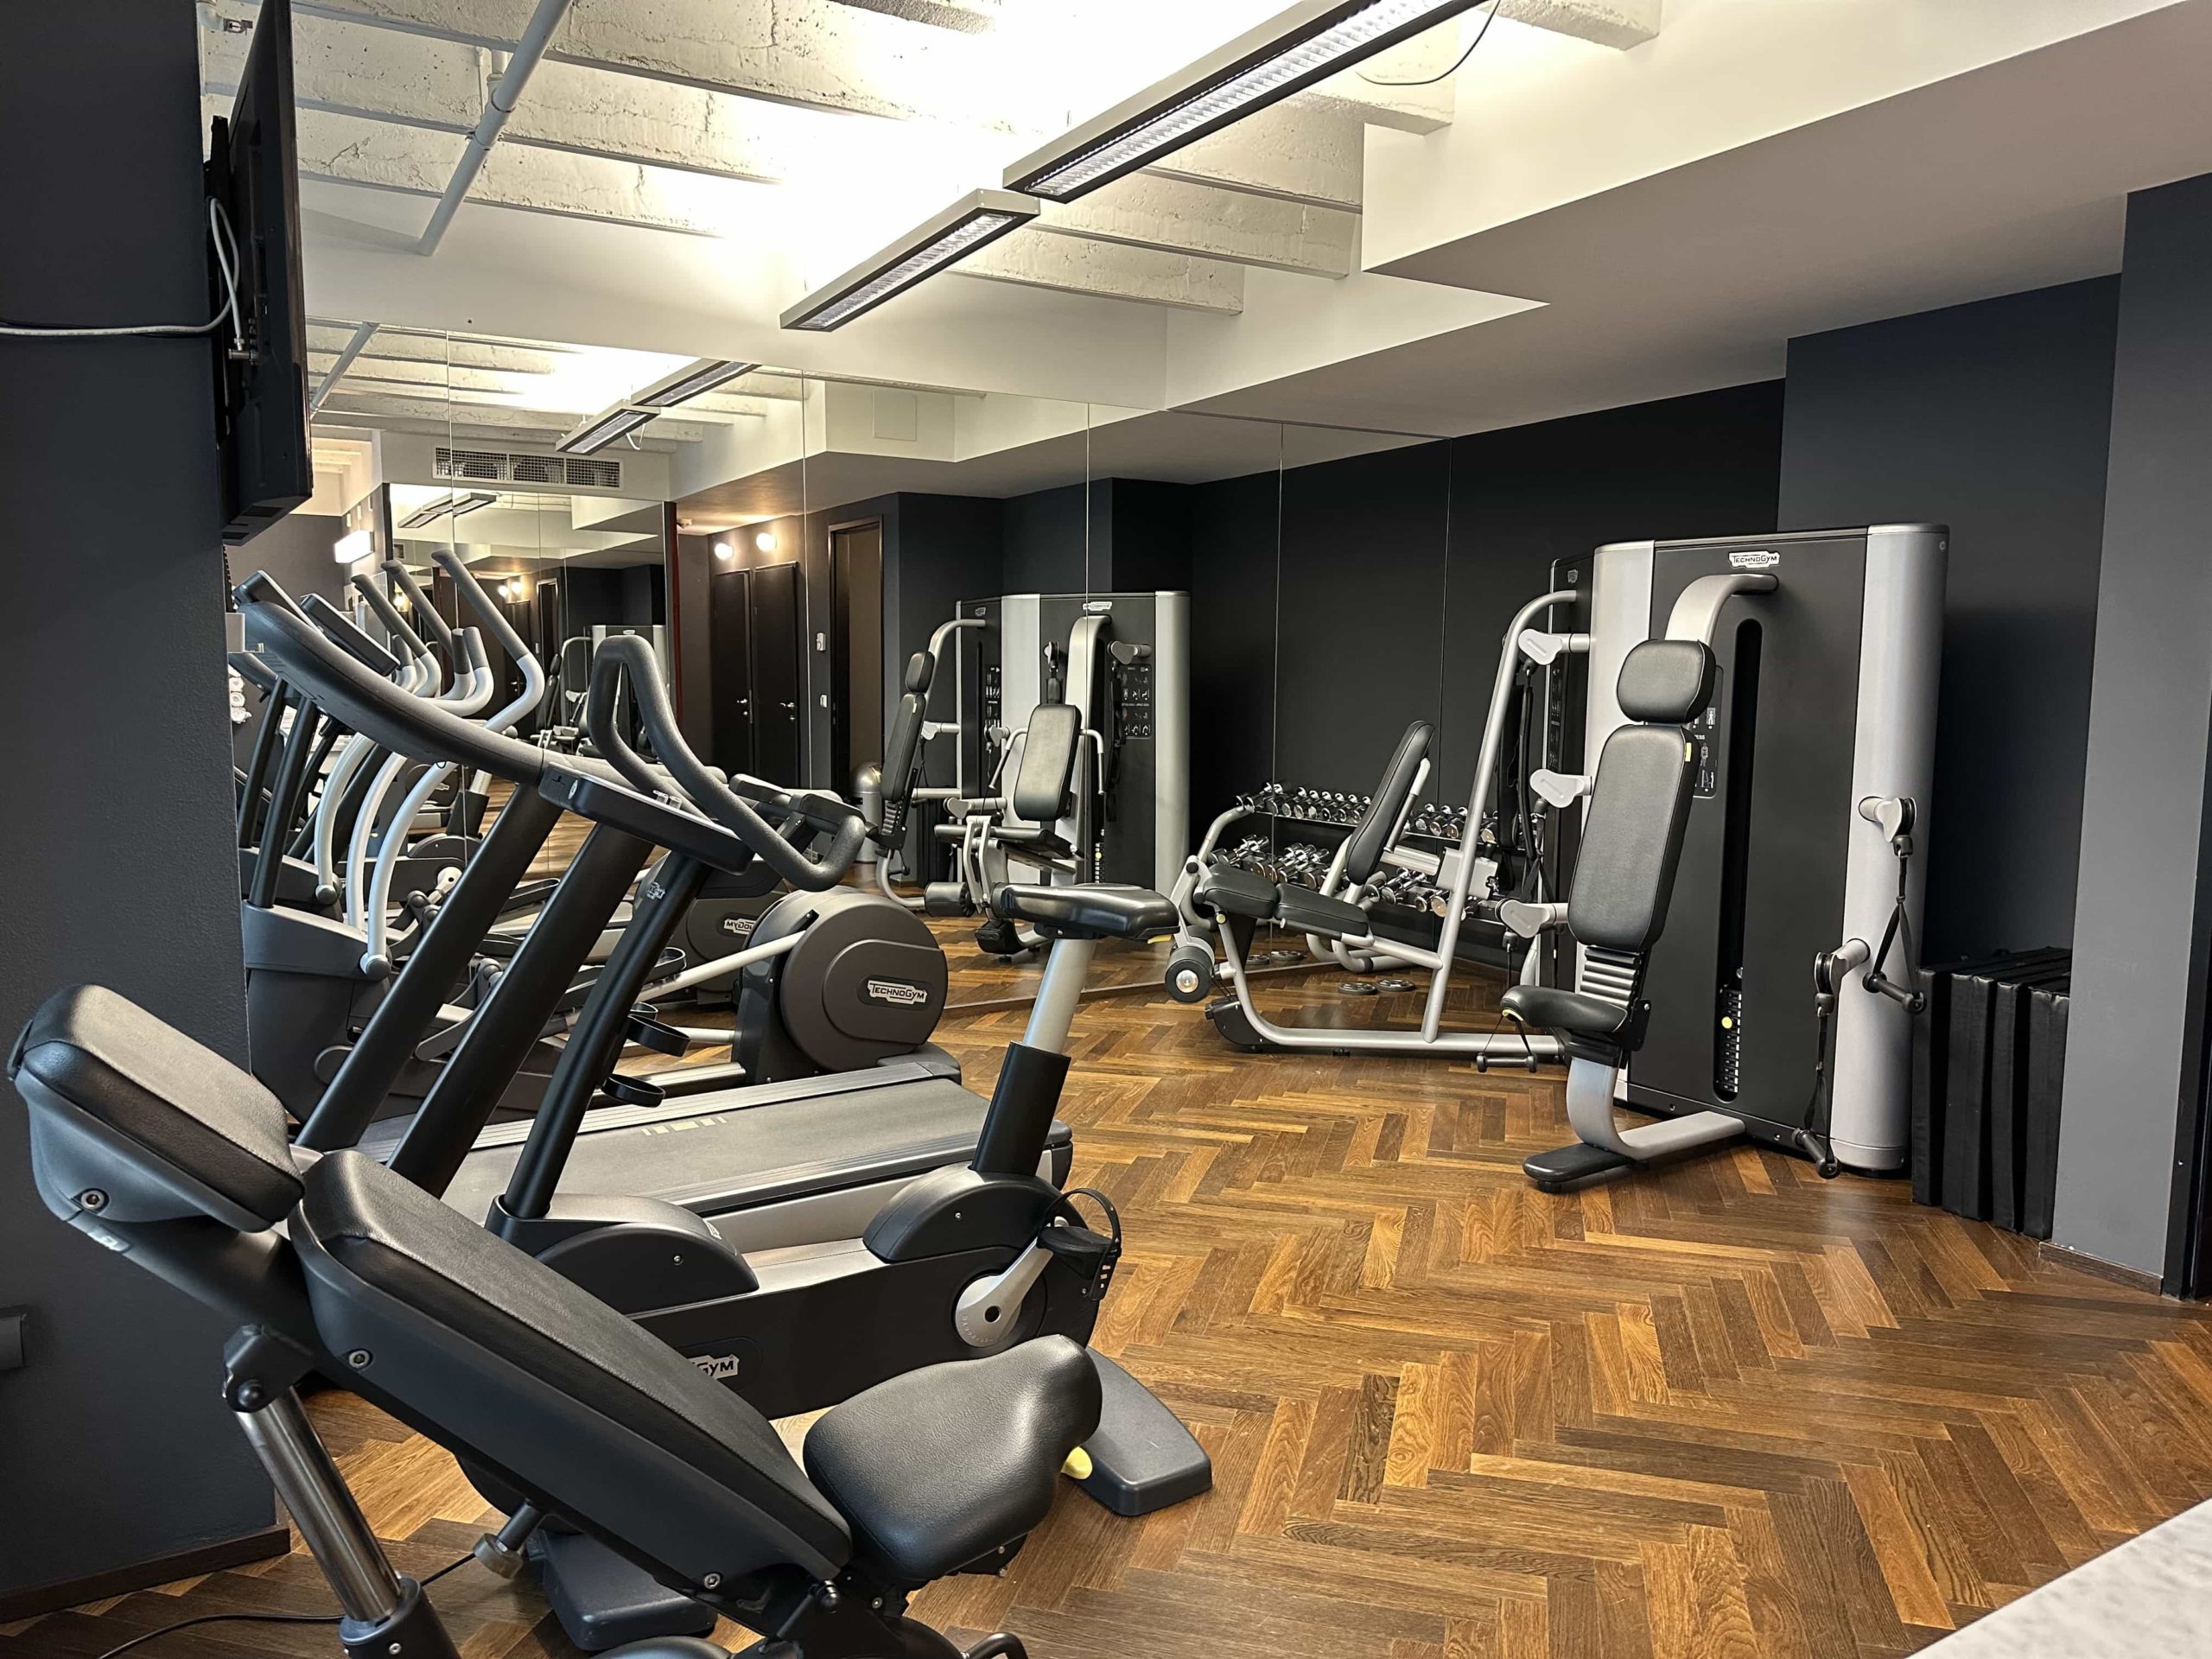 Gym equipment in a small room, including treadmill, elliptical, and weight machines